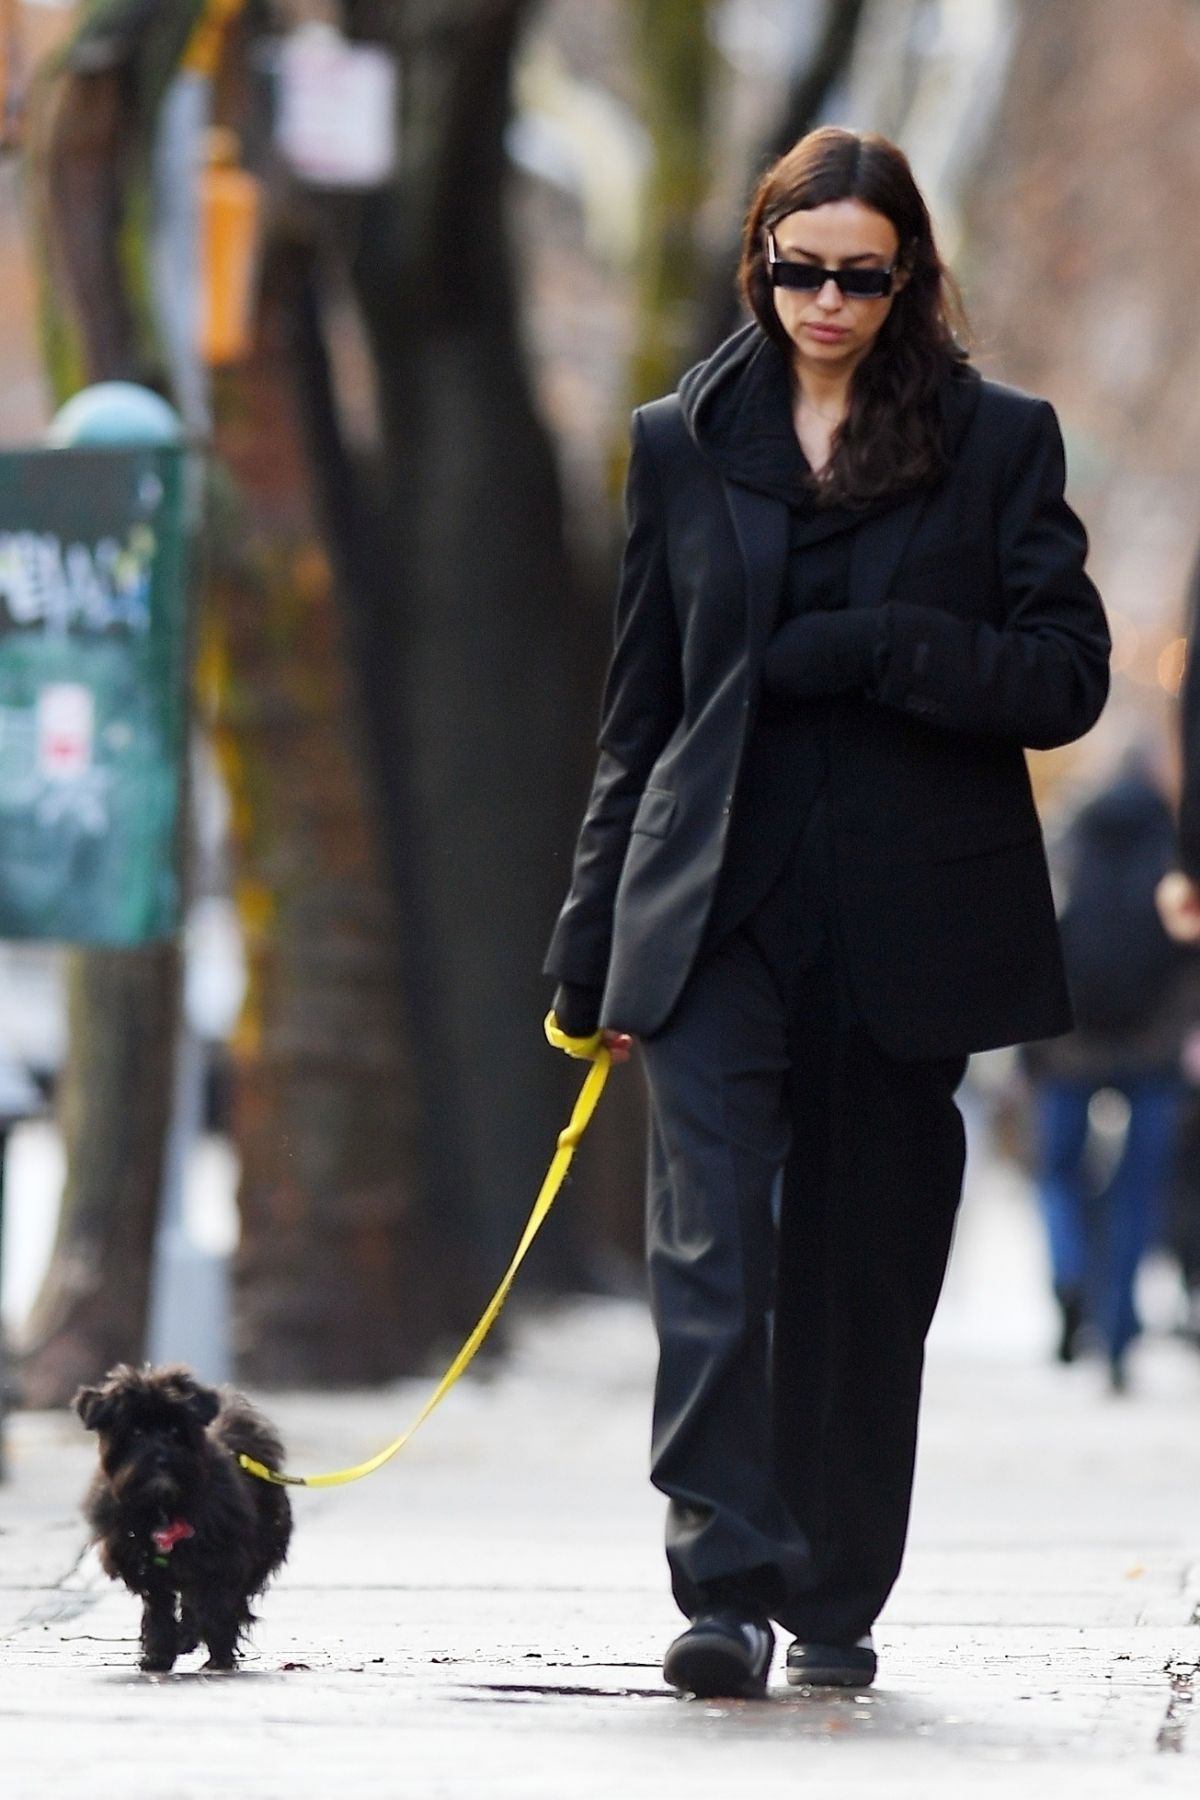 Irina Shayk in Stylish Black Suit Pant Outfit Strolling with Dog in NYC